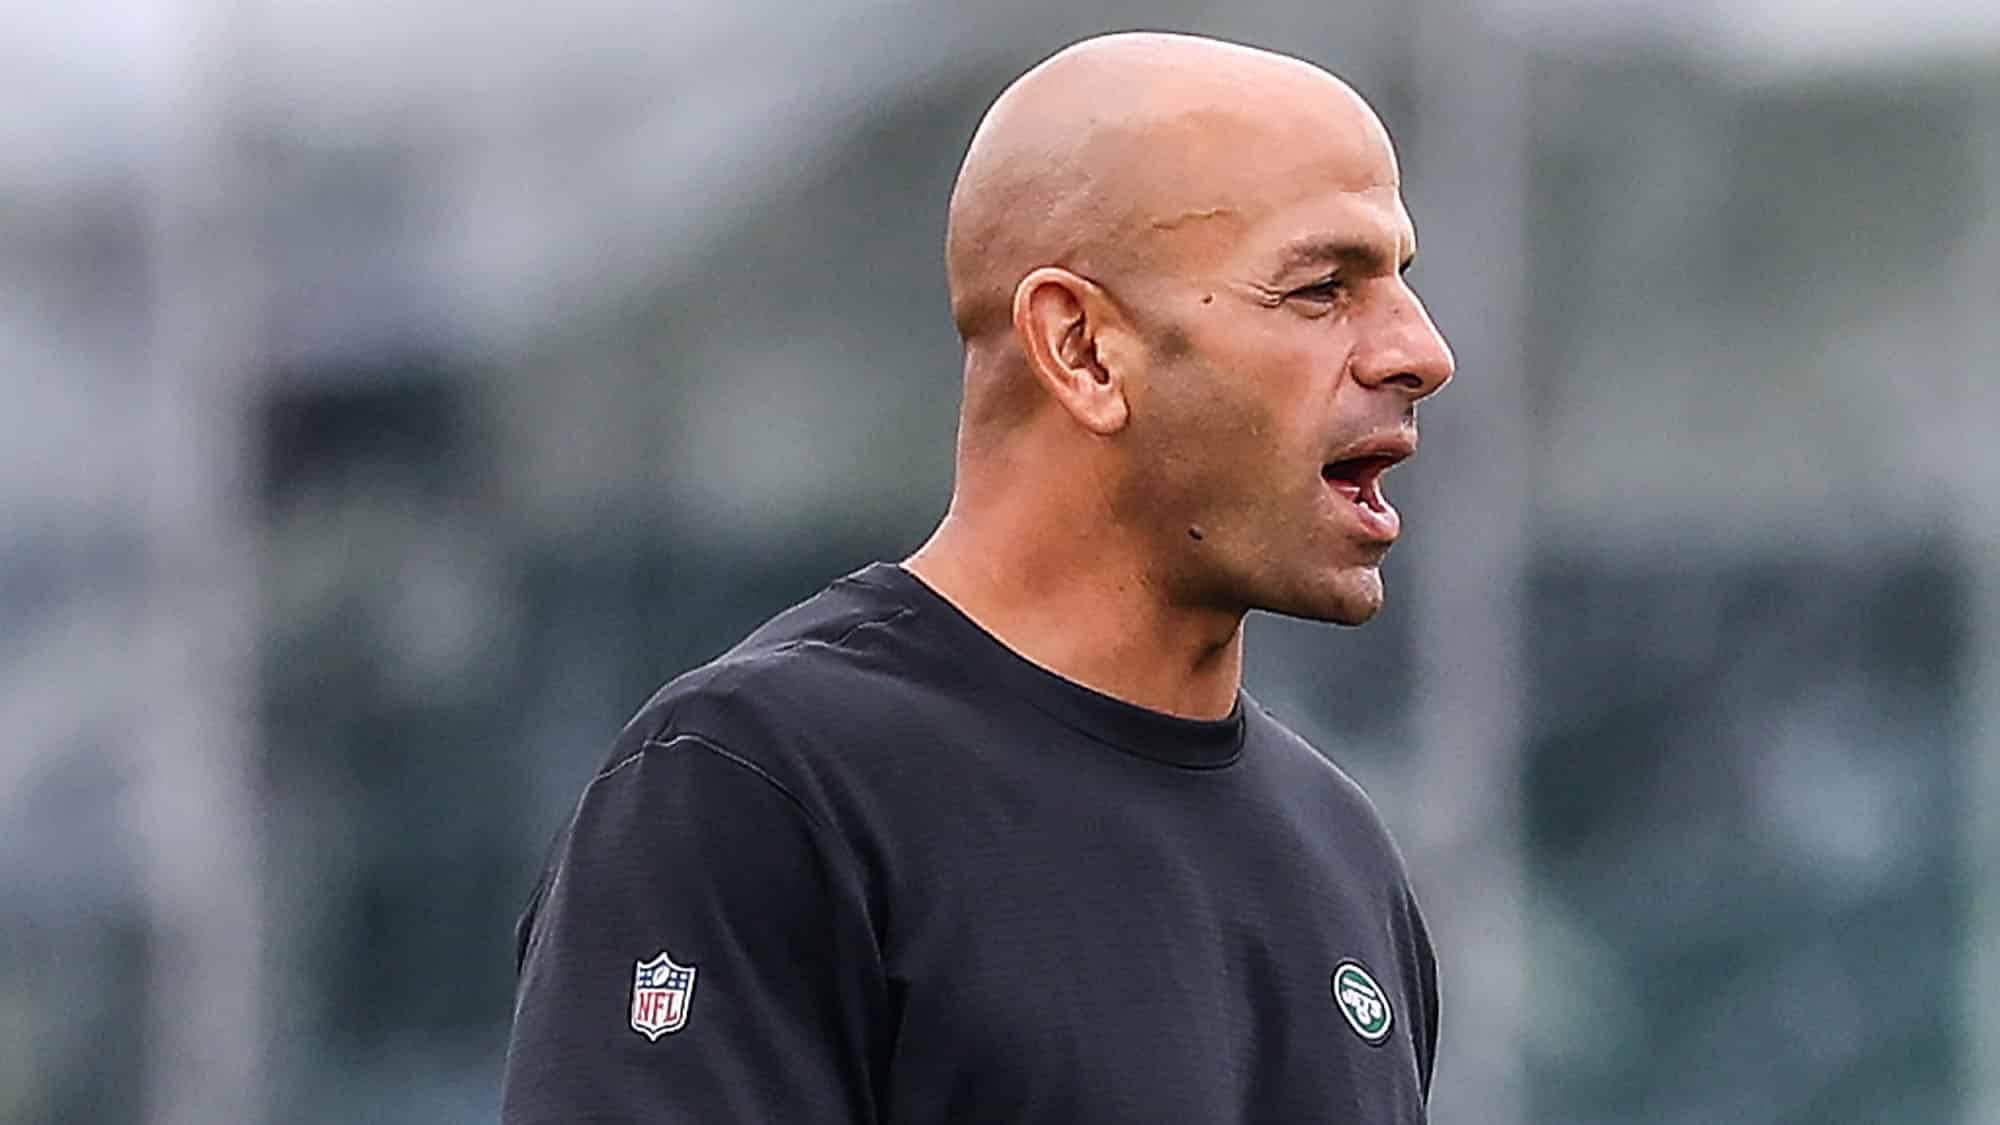 Robert Saleh runs stadiums in a Rocky-esque workout that excites NY Jets fans prior to the preseason opener at MetLife Stadium.